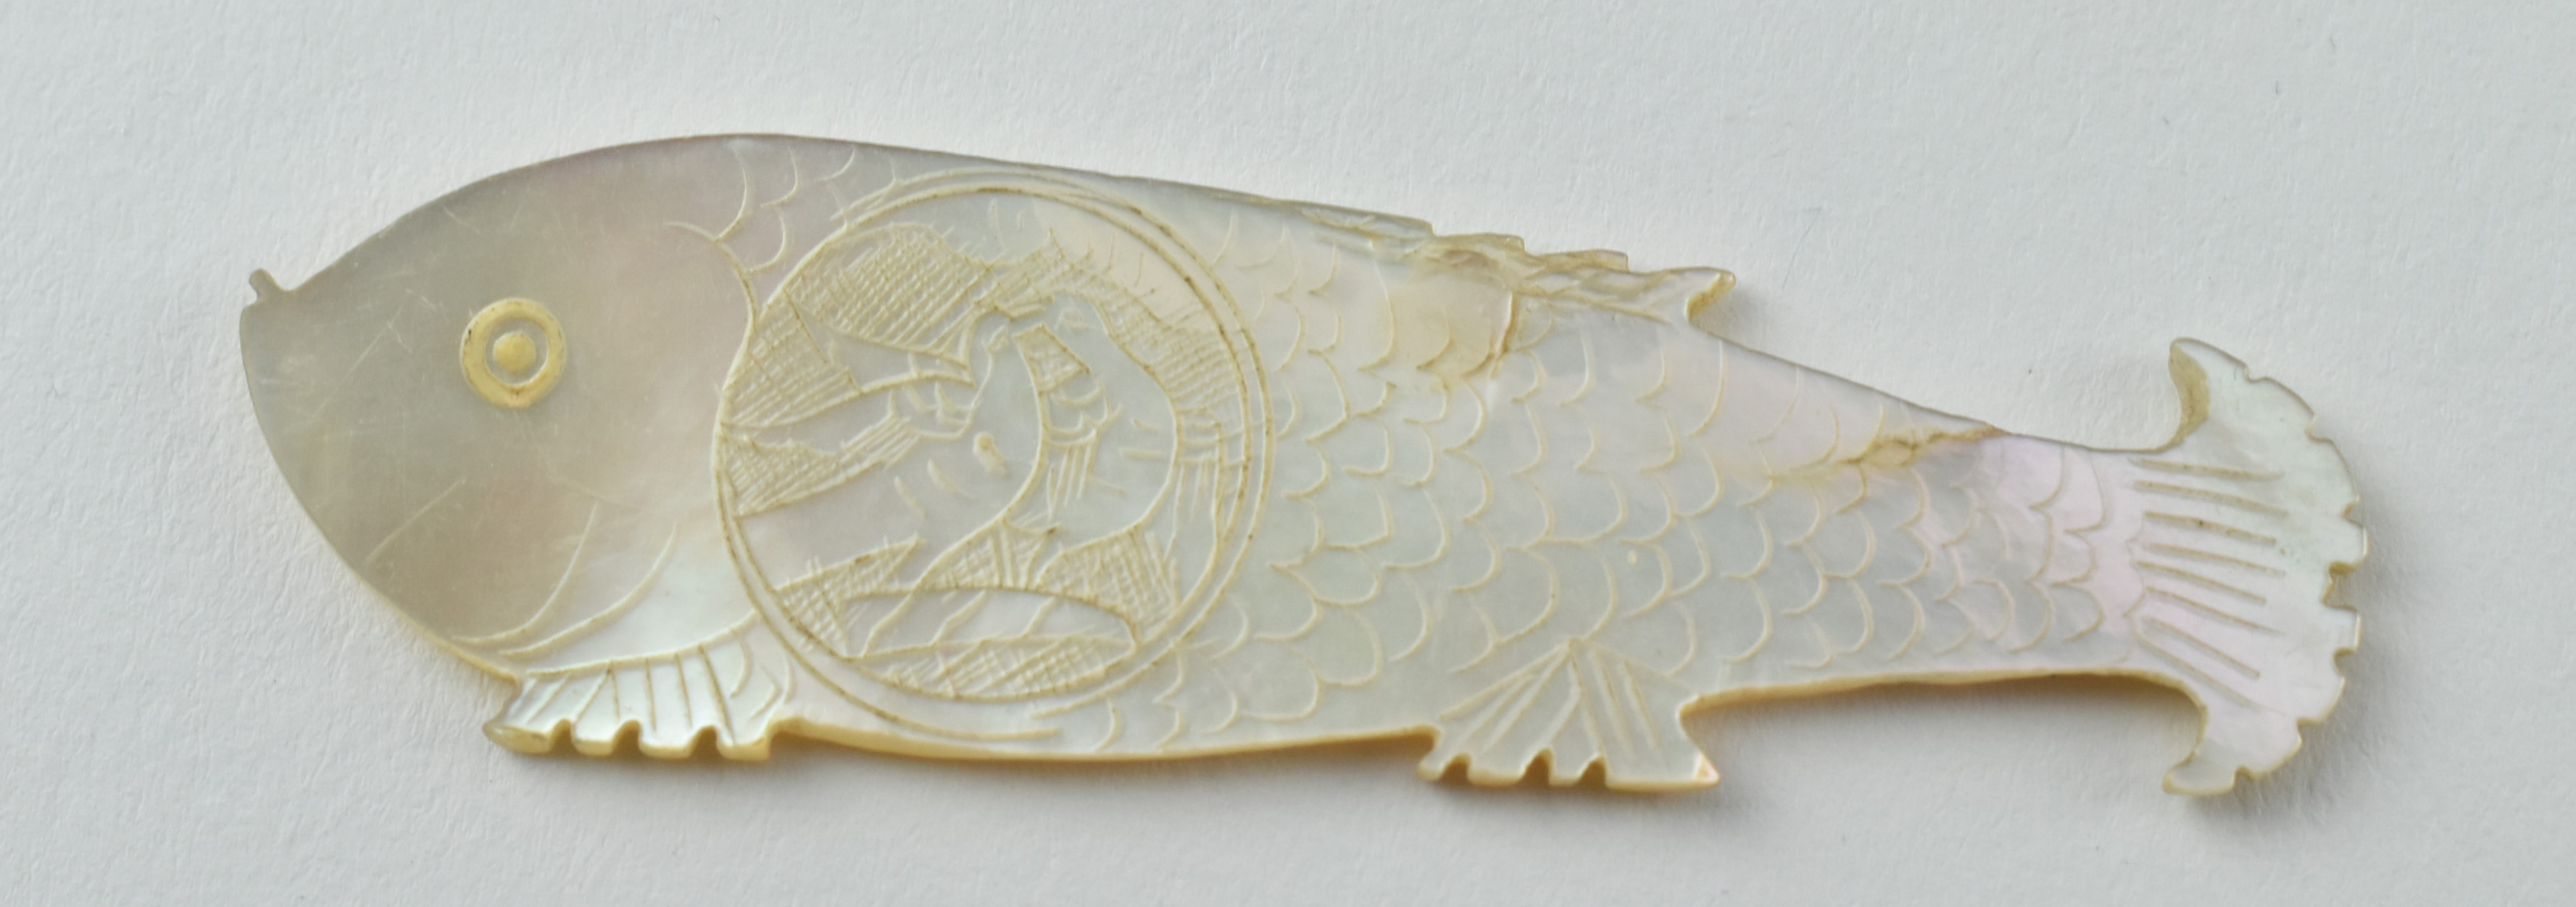 QING DYNASTY MOTHER OF PEARL GAMING TOKENS 清十三行贝母筹码 - Image 10 of 11